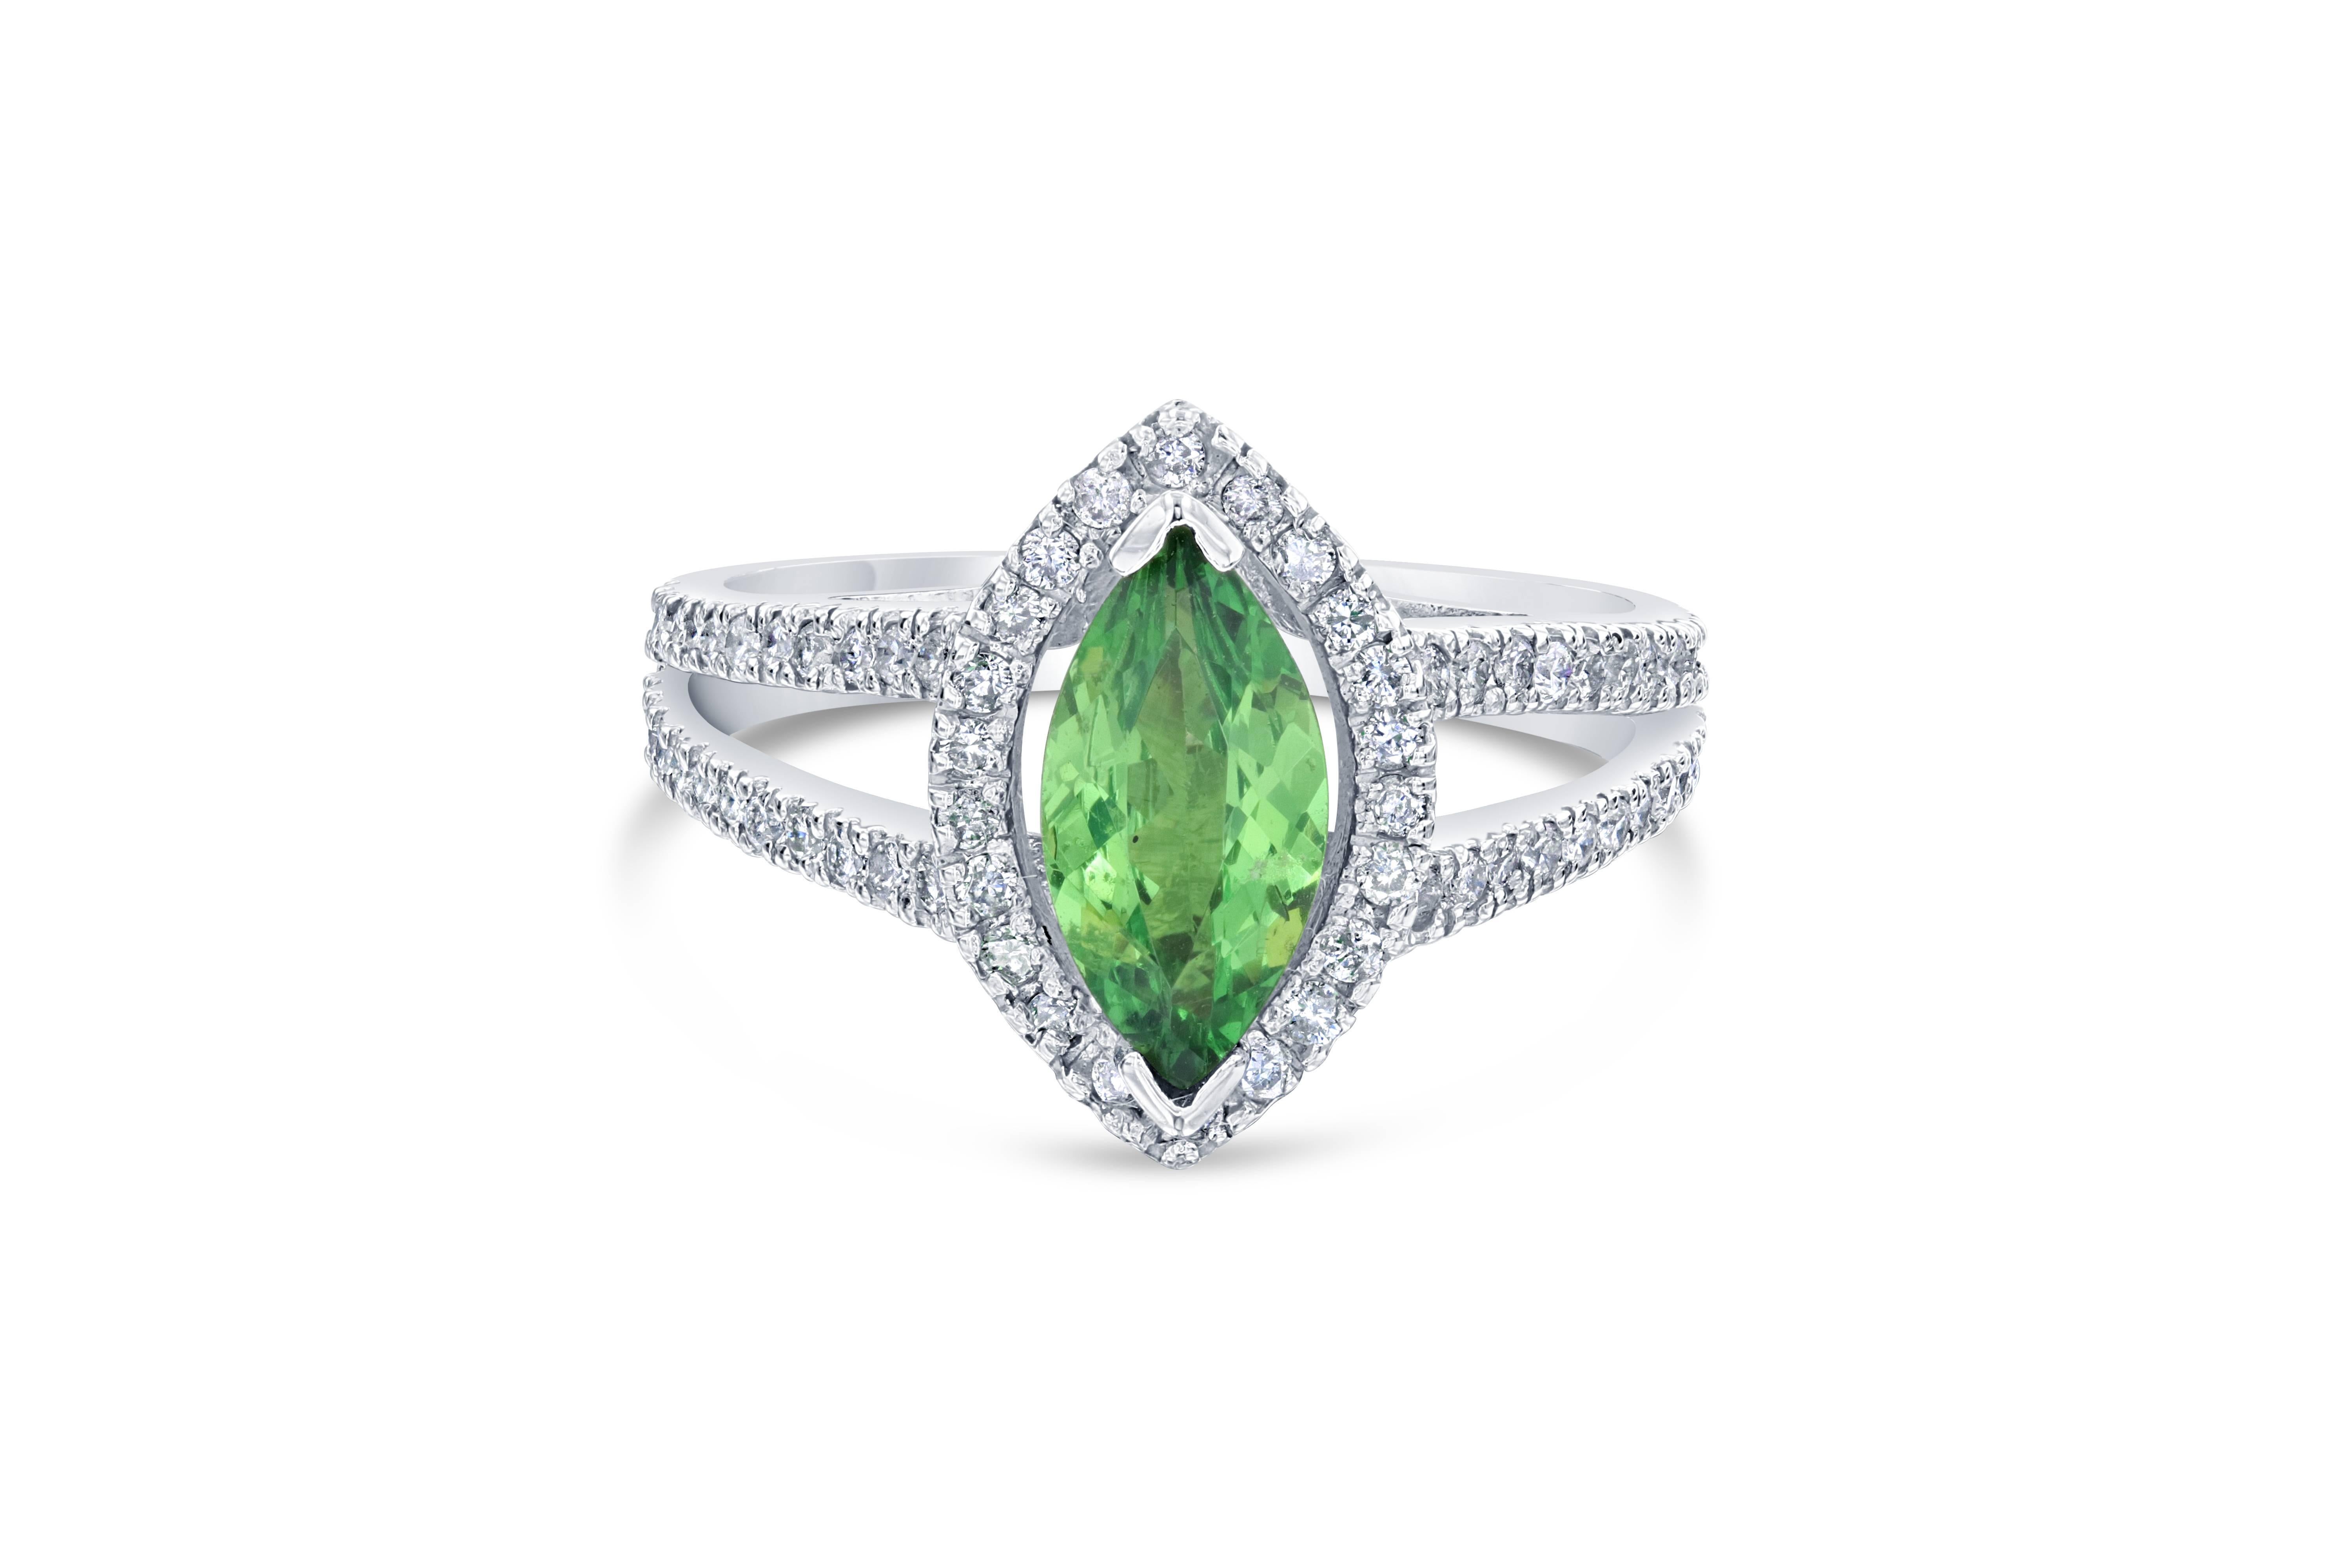 A gorgeous setting with a stunning center gem that can easily be a cocktail ring or a unique engagement ring, The ring has a Marquise Cut Tsavorite which weighs 1.10 carats and is surrounded by 70 Round Cut Diamonds that weighs 0.52 carats. The